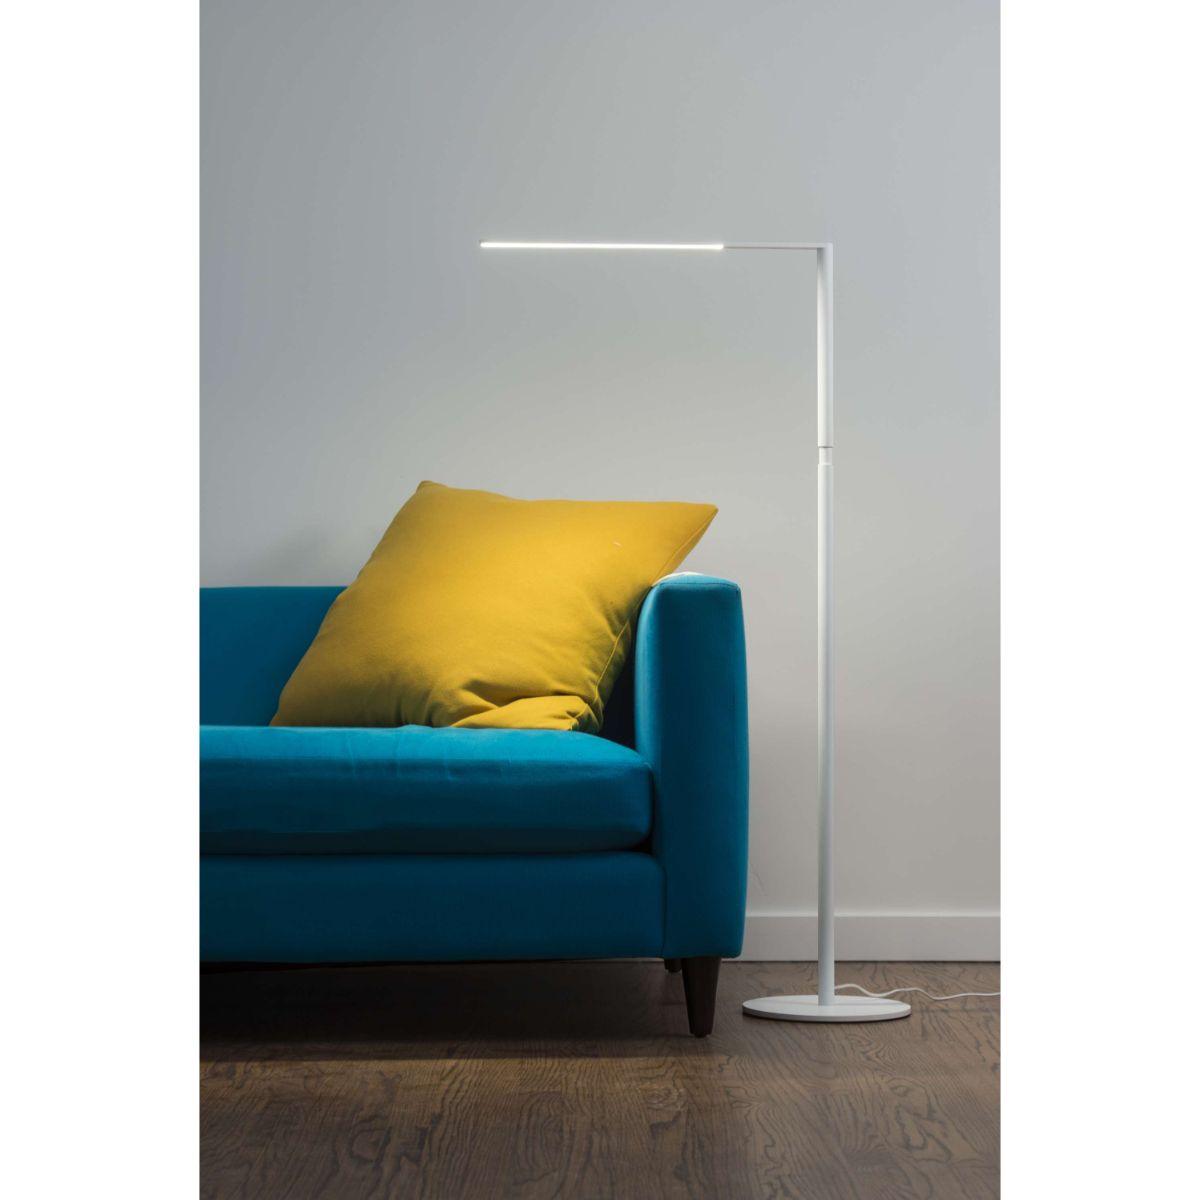 Lady7 Contemporary LED Floor Lamp with USB Port